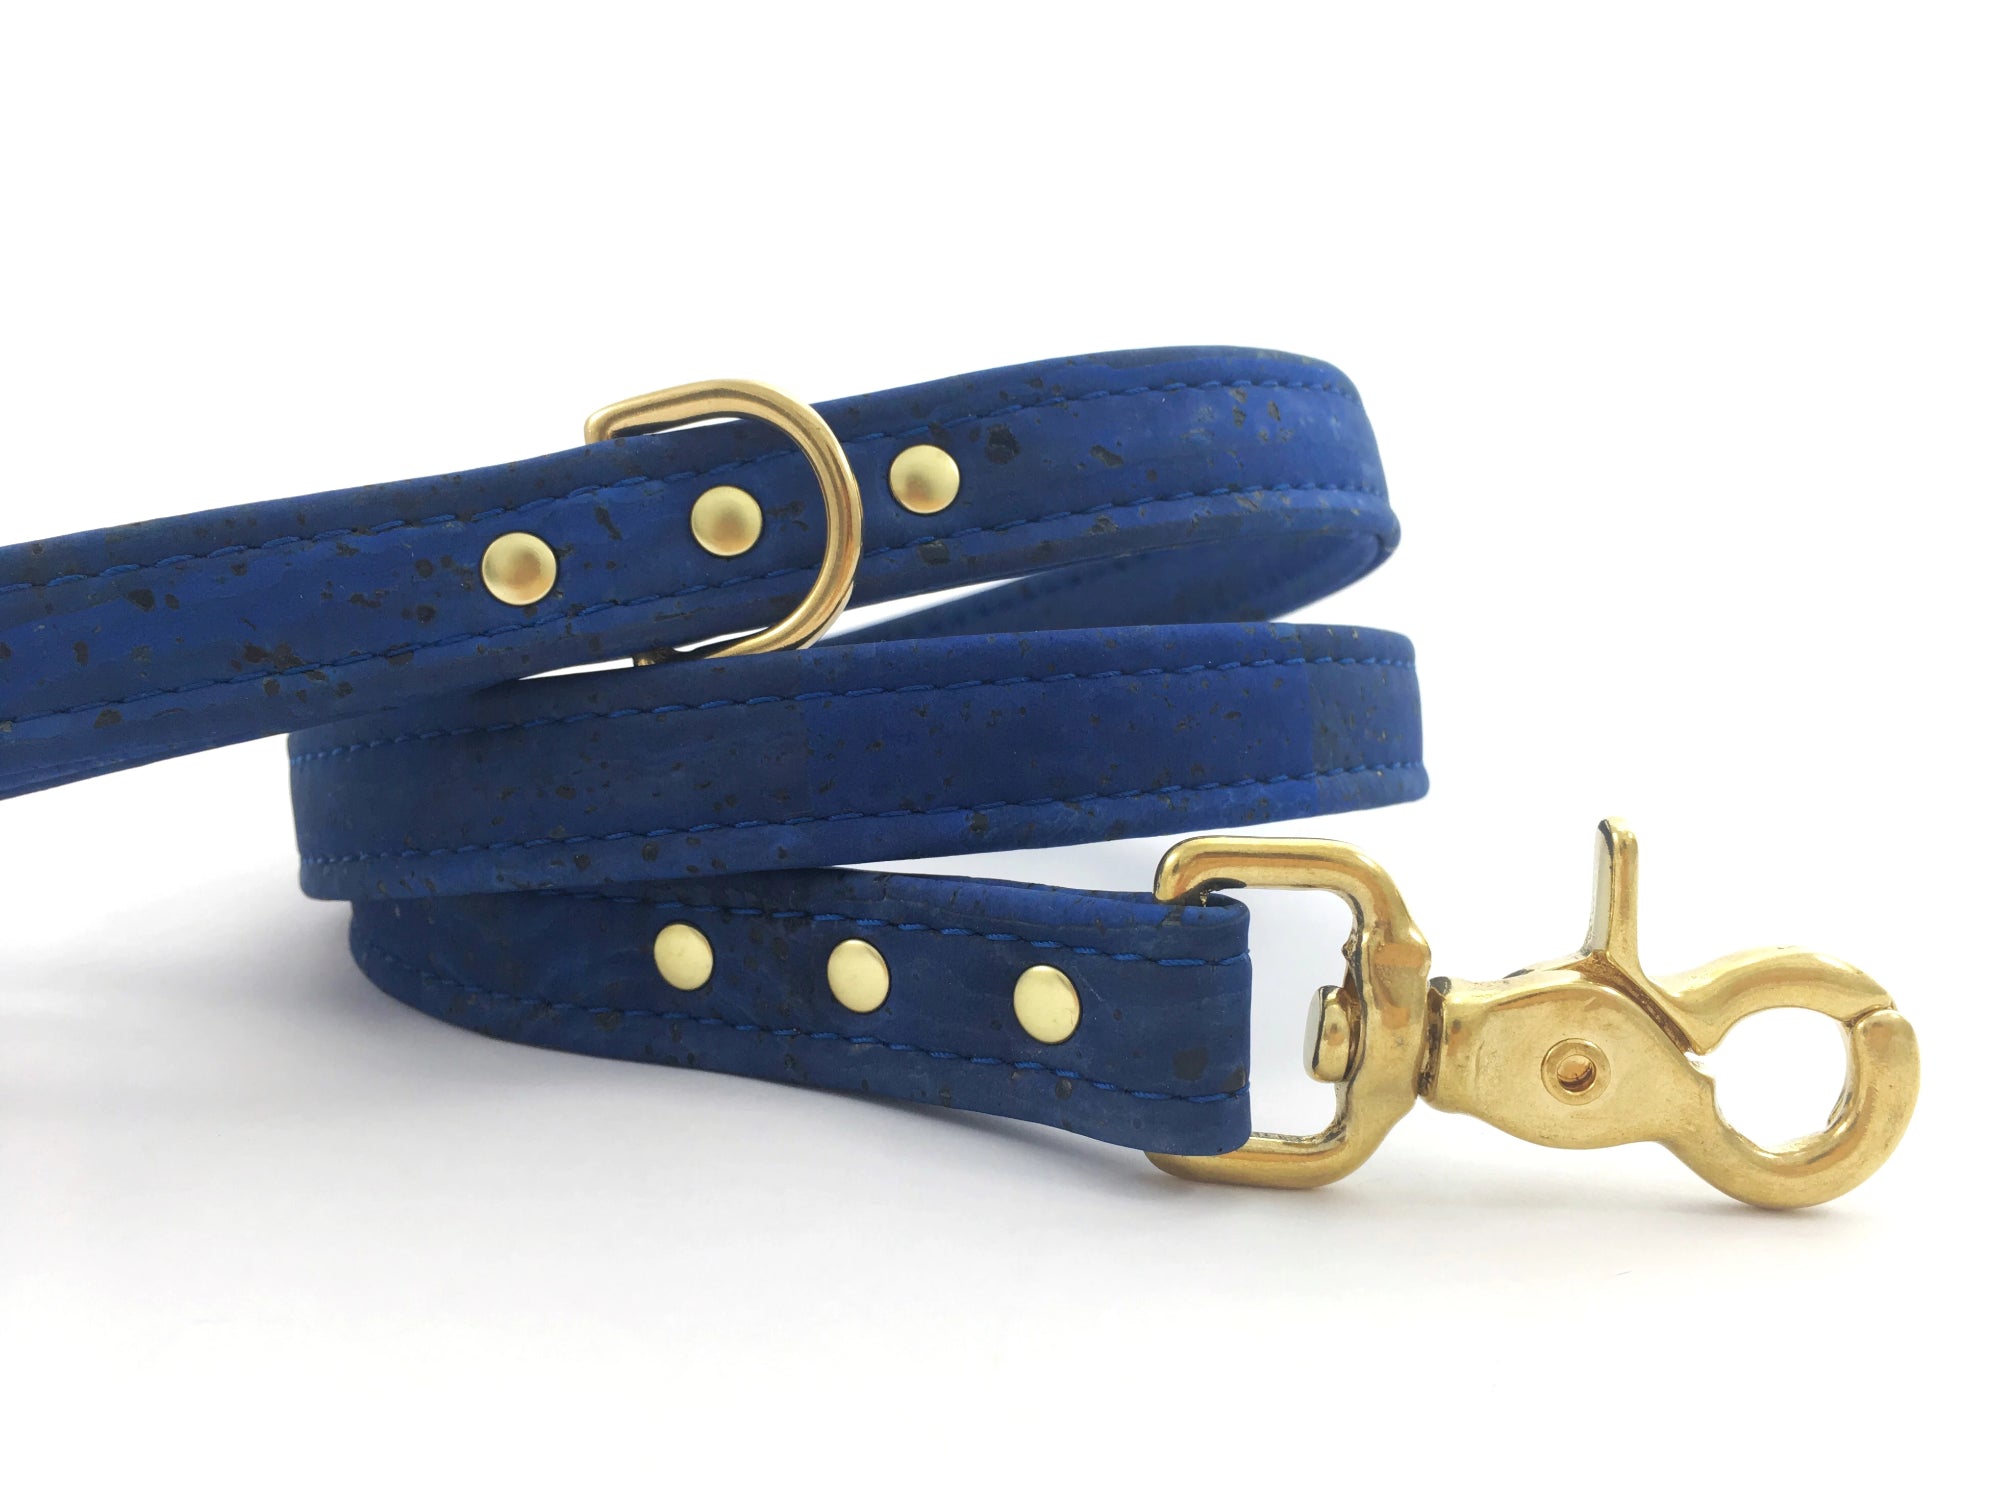 Blue dog leash in luxury vegan cork leather with solid brass trigger snap hook